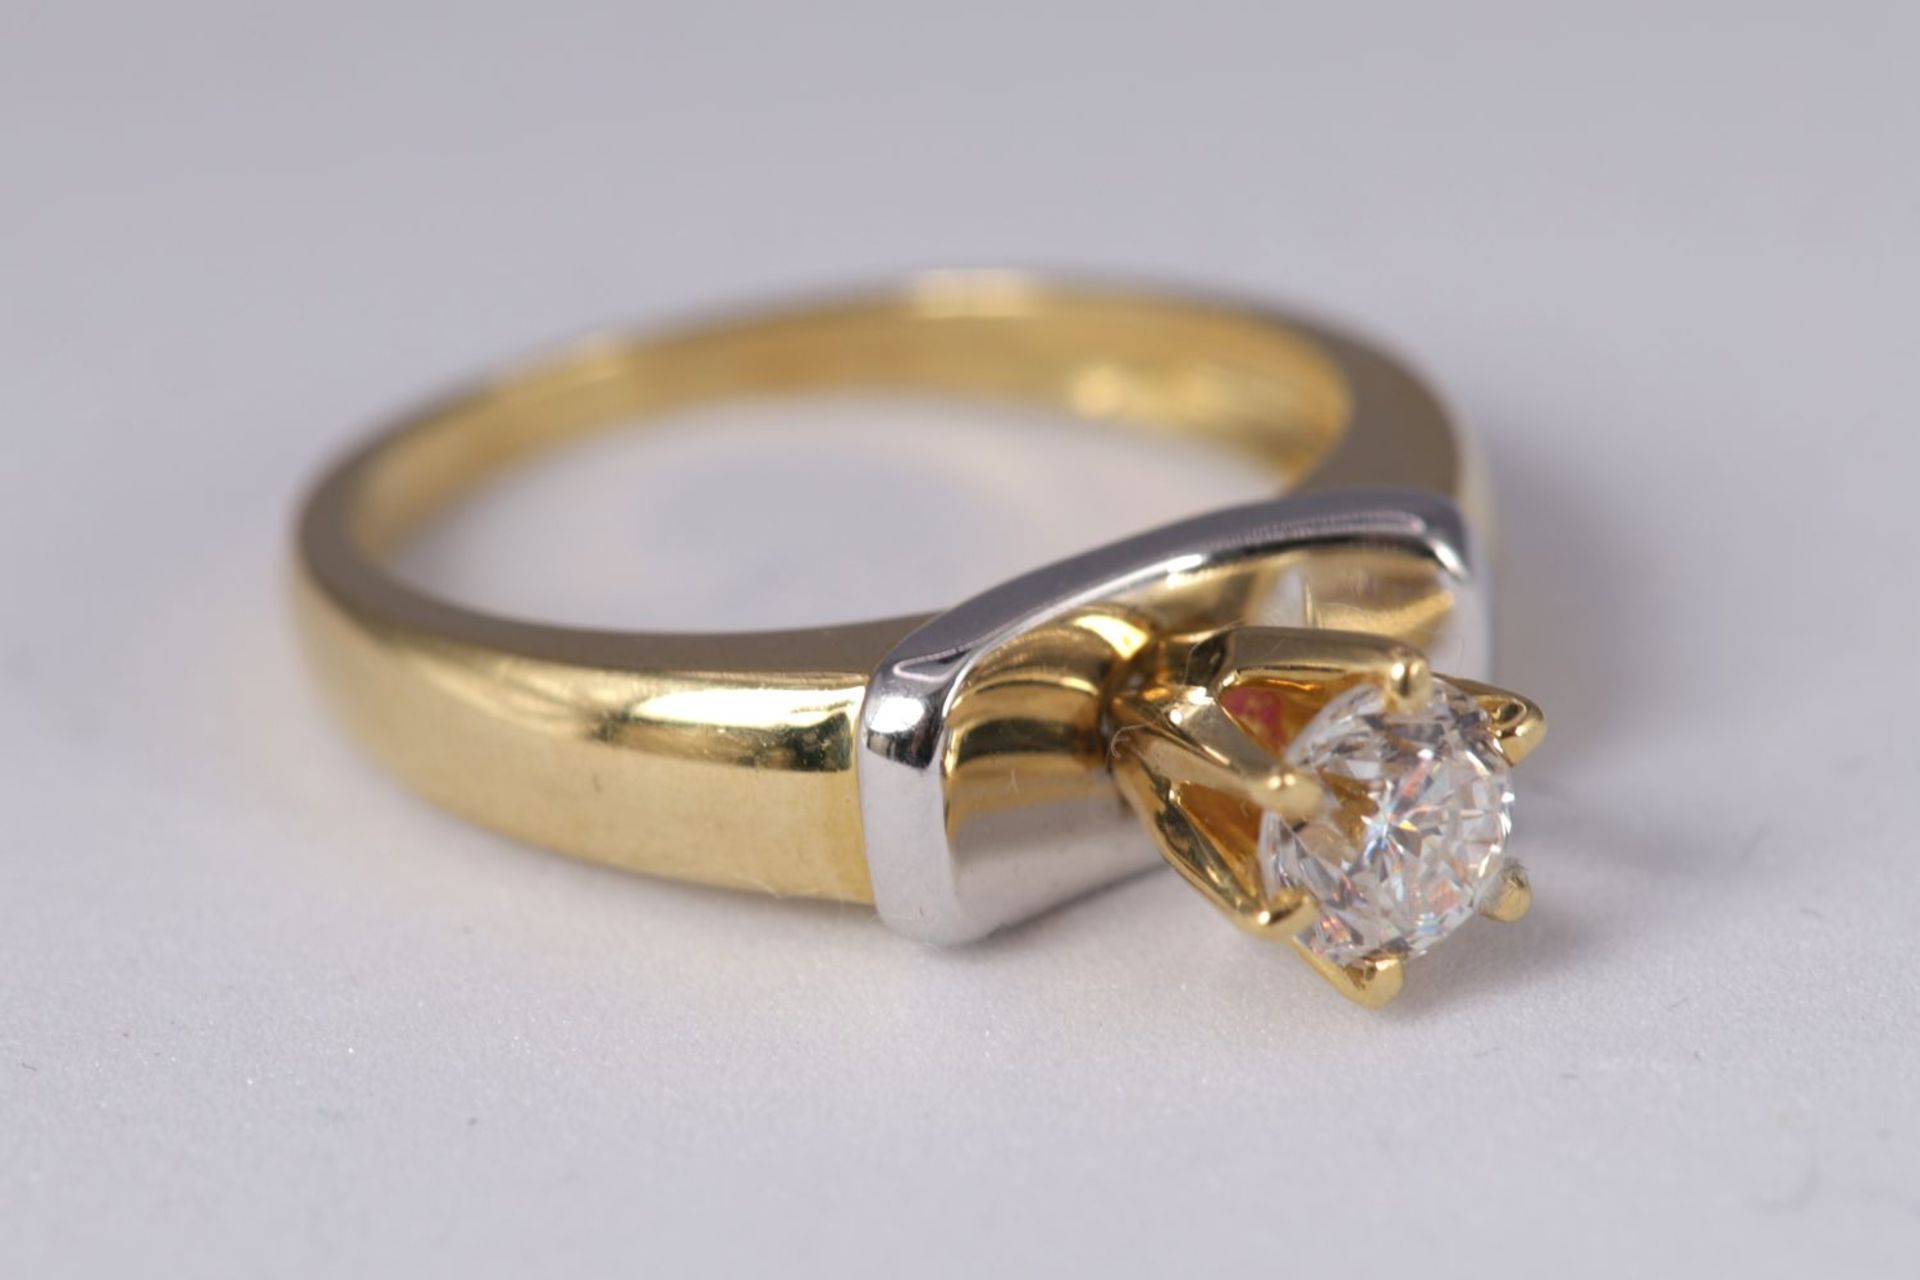 18K GOLD DIAMOND SOLITAIRE RING - Image 2 of 3